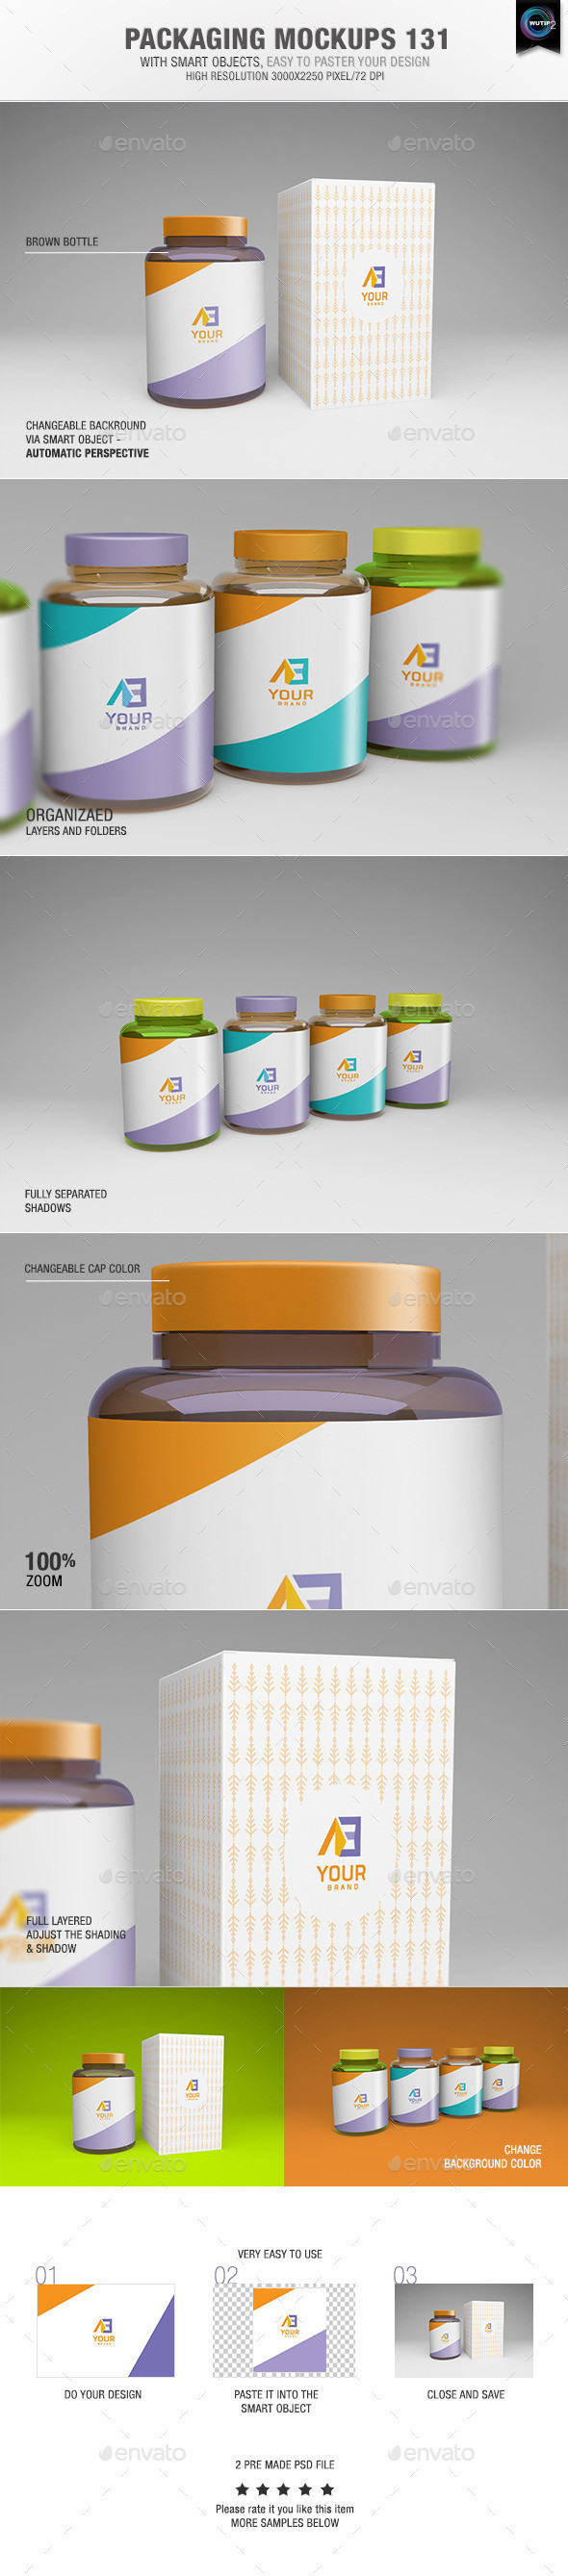 Packaging 20mockups 20131 20preview